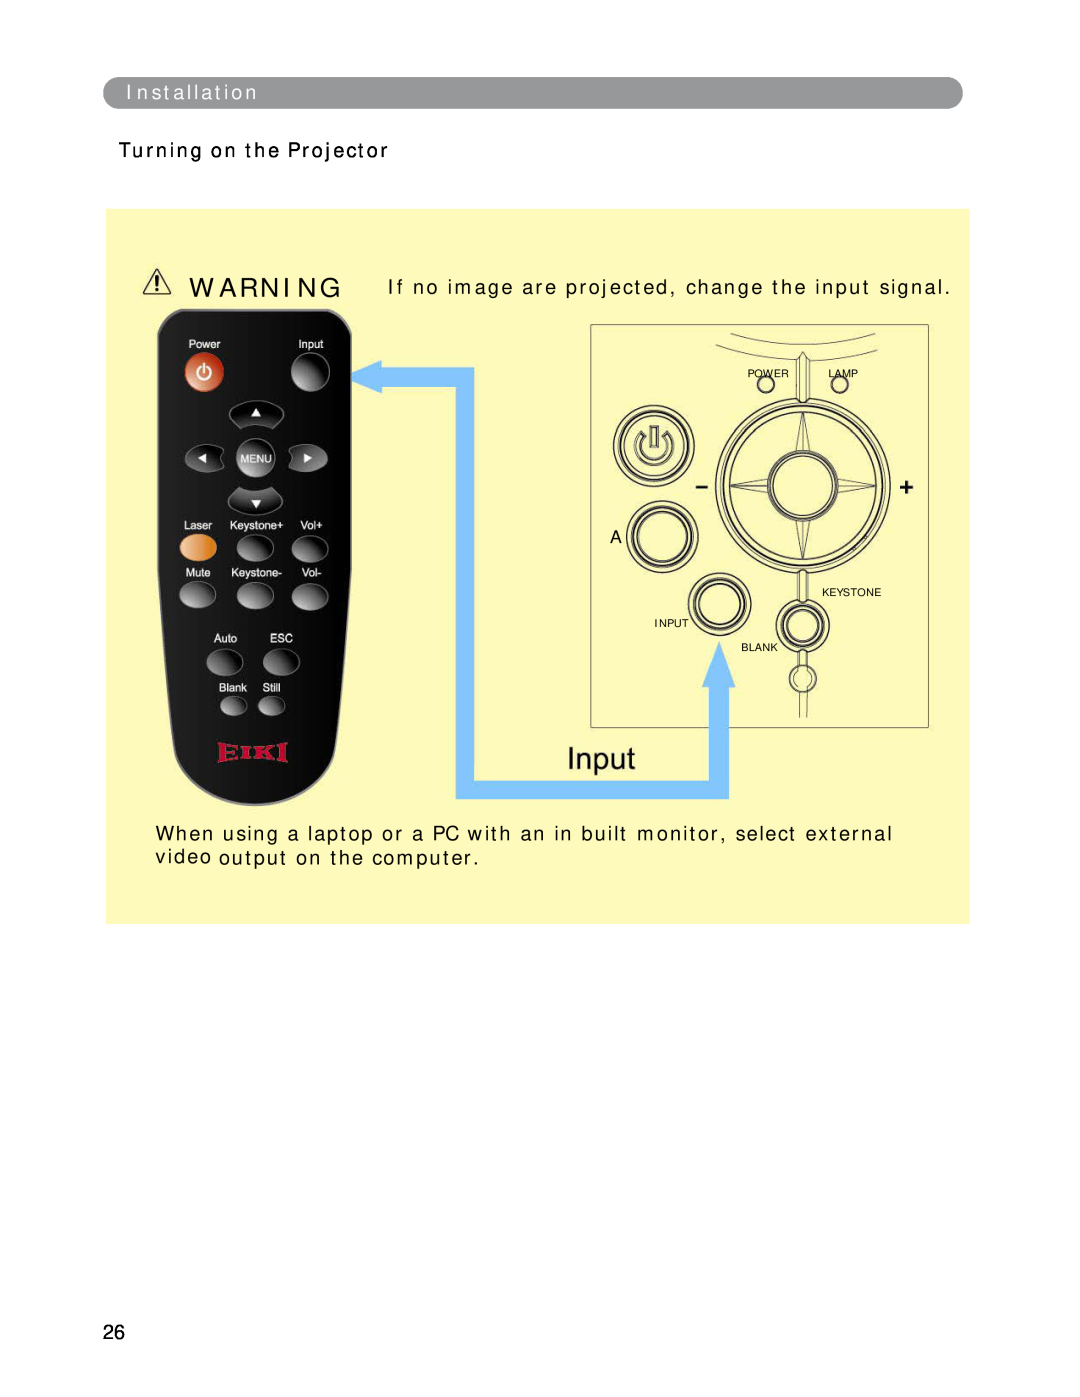 Eiki LC-XWP2000 manual Installation, Turning on the Projector, WARNING If no image are projected, change the input signal 